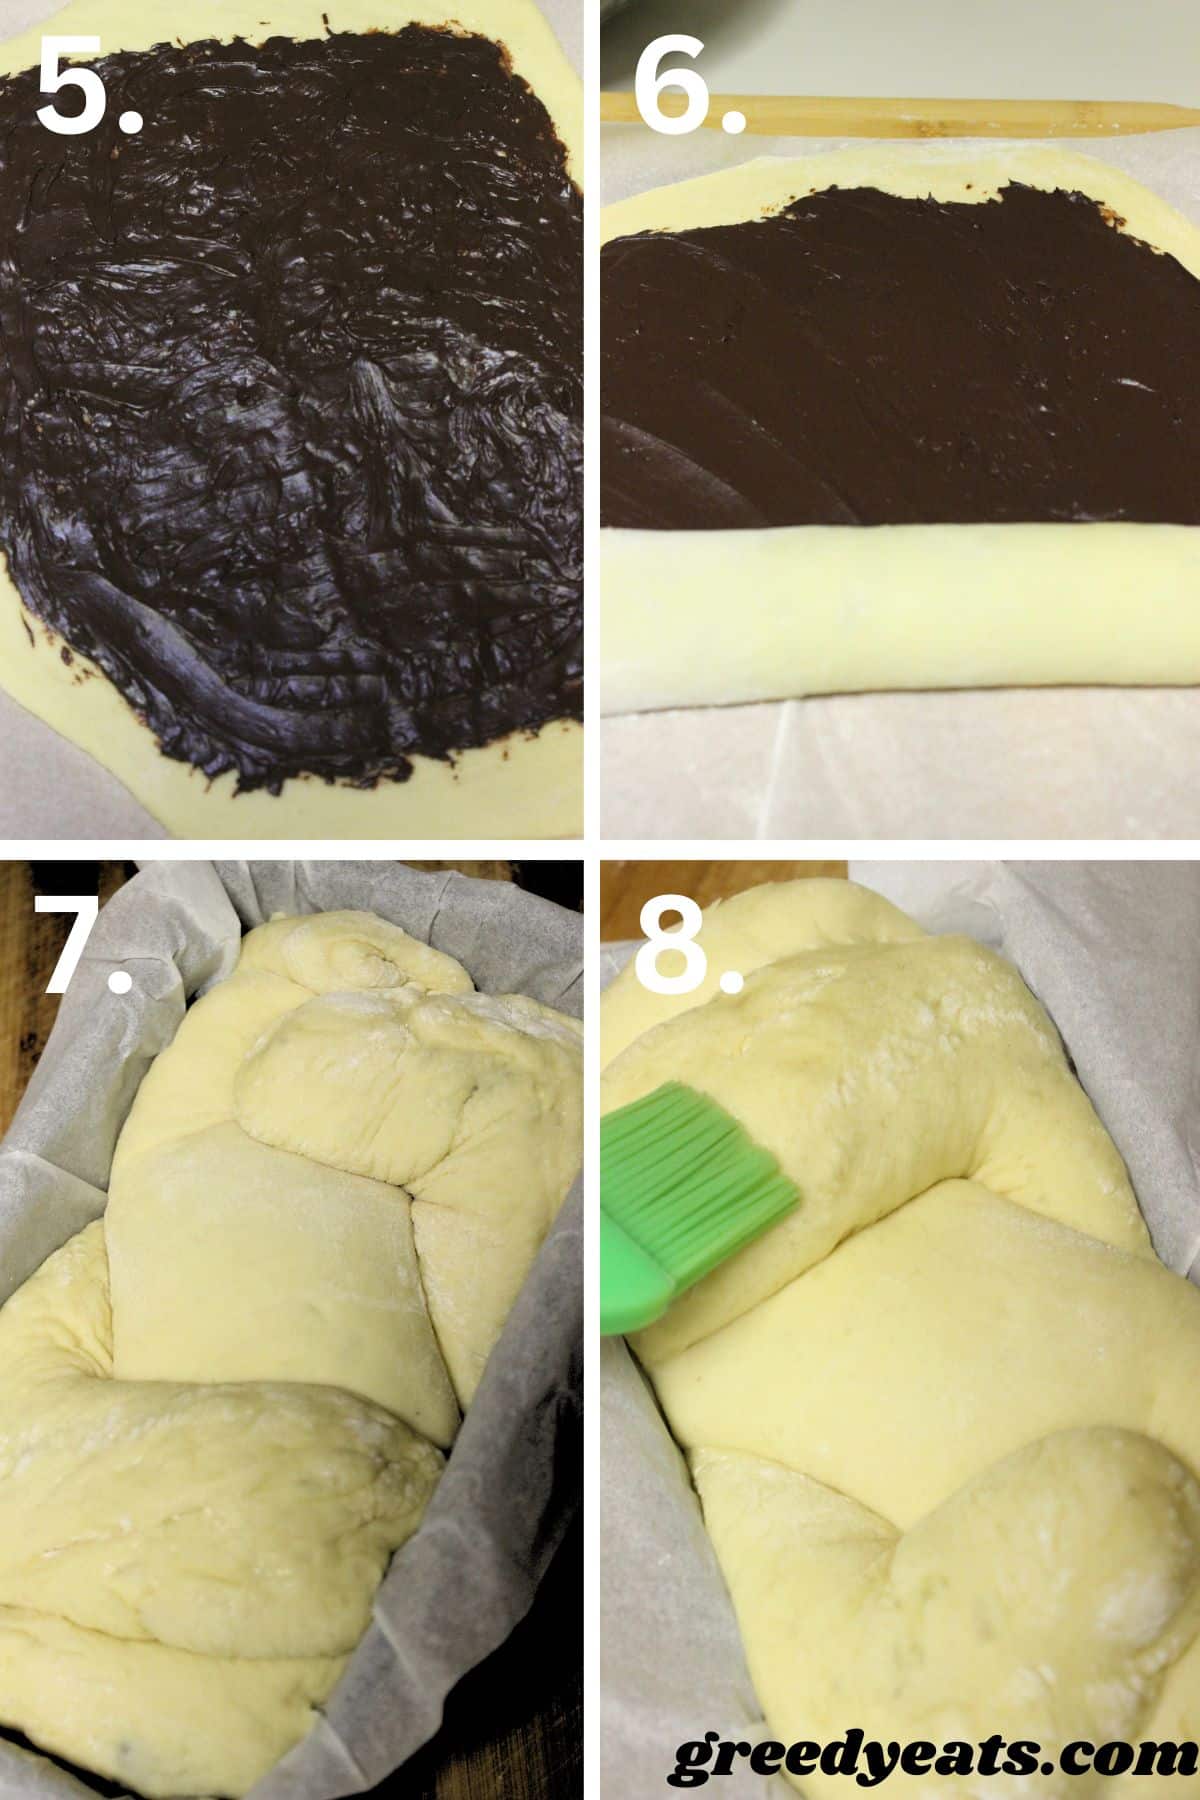 Process to spread chocolate filling on dough and twist it to form a braid.